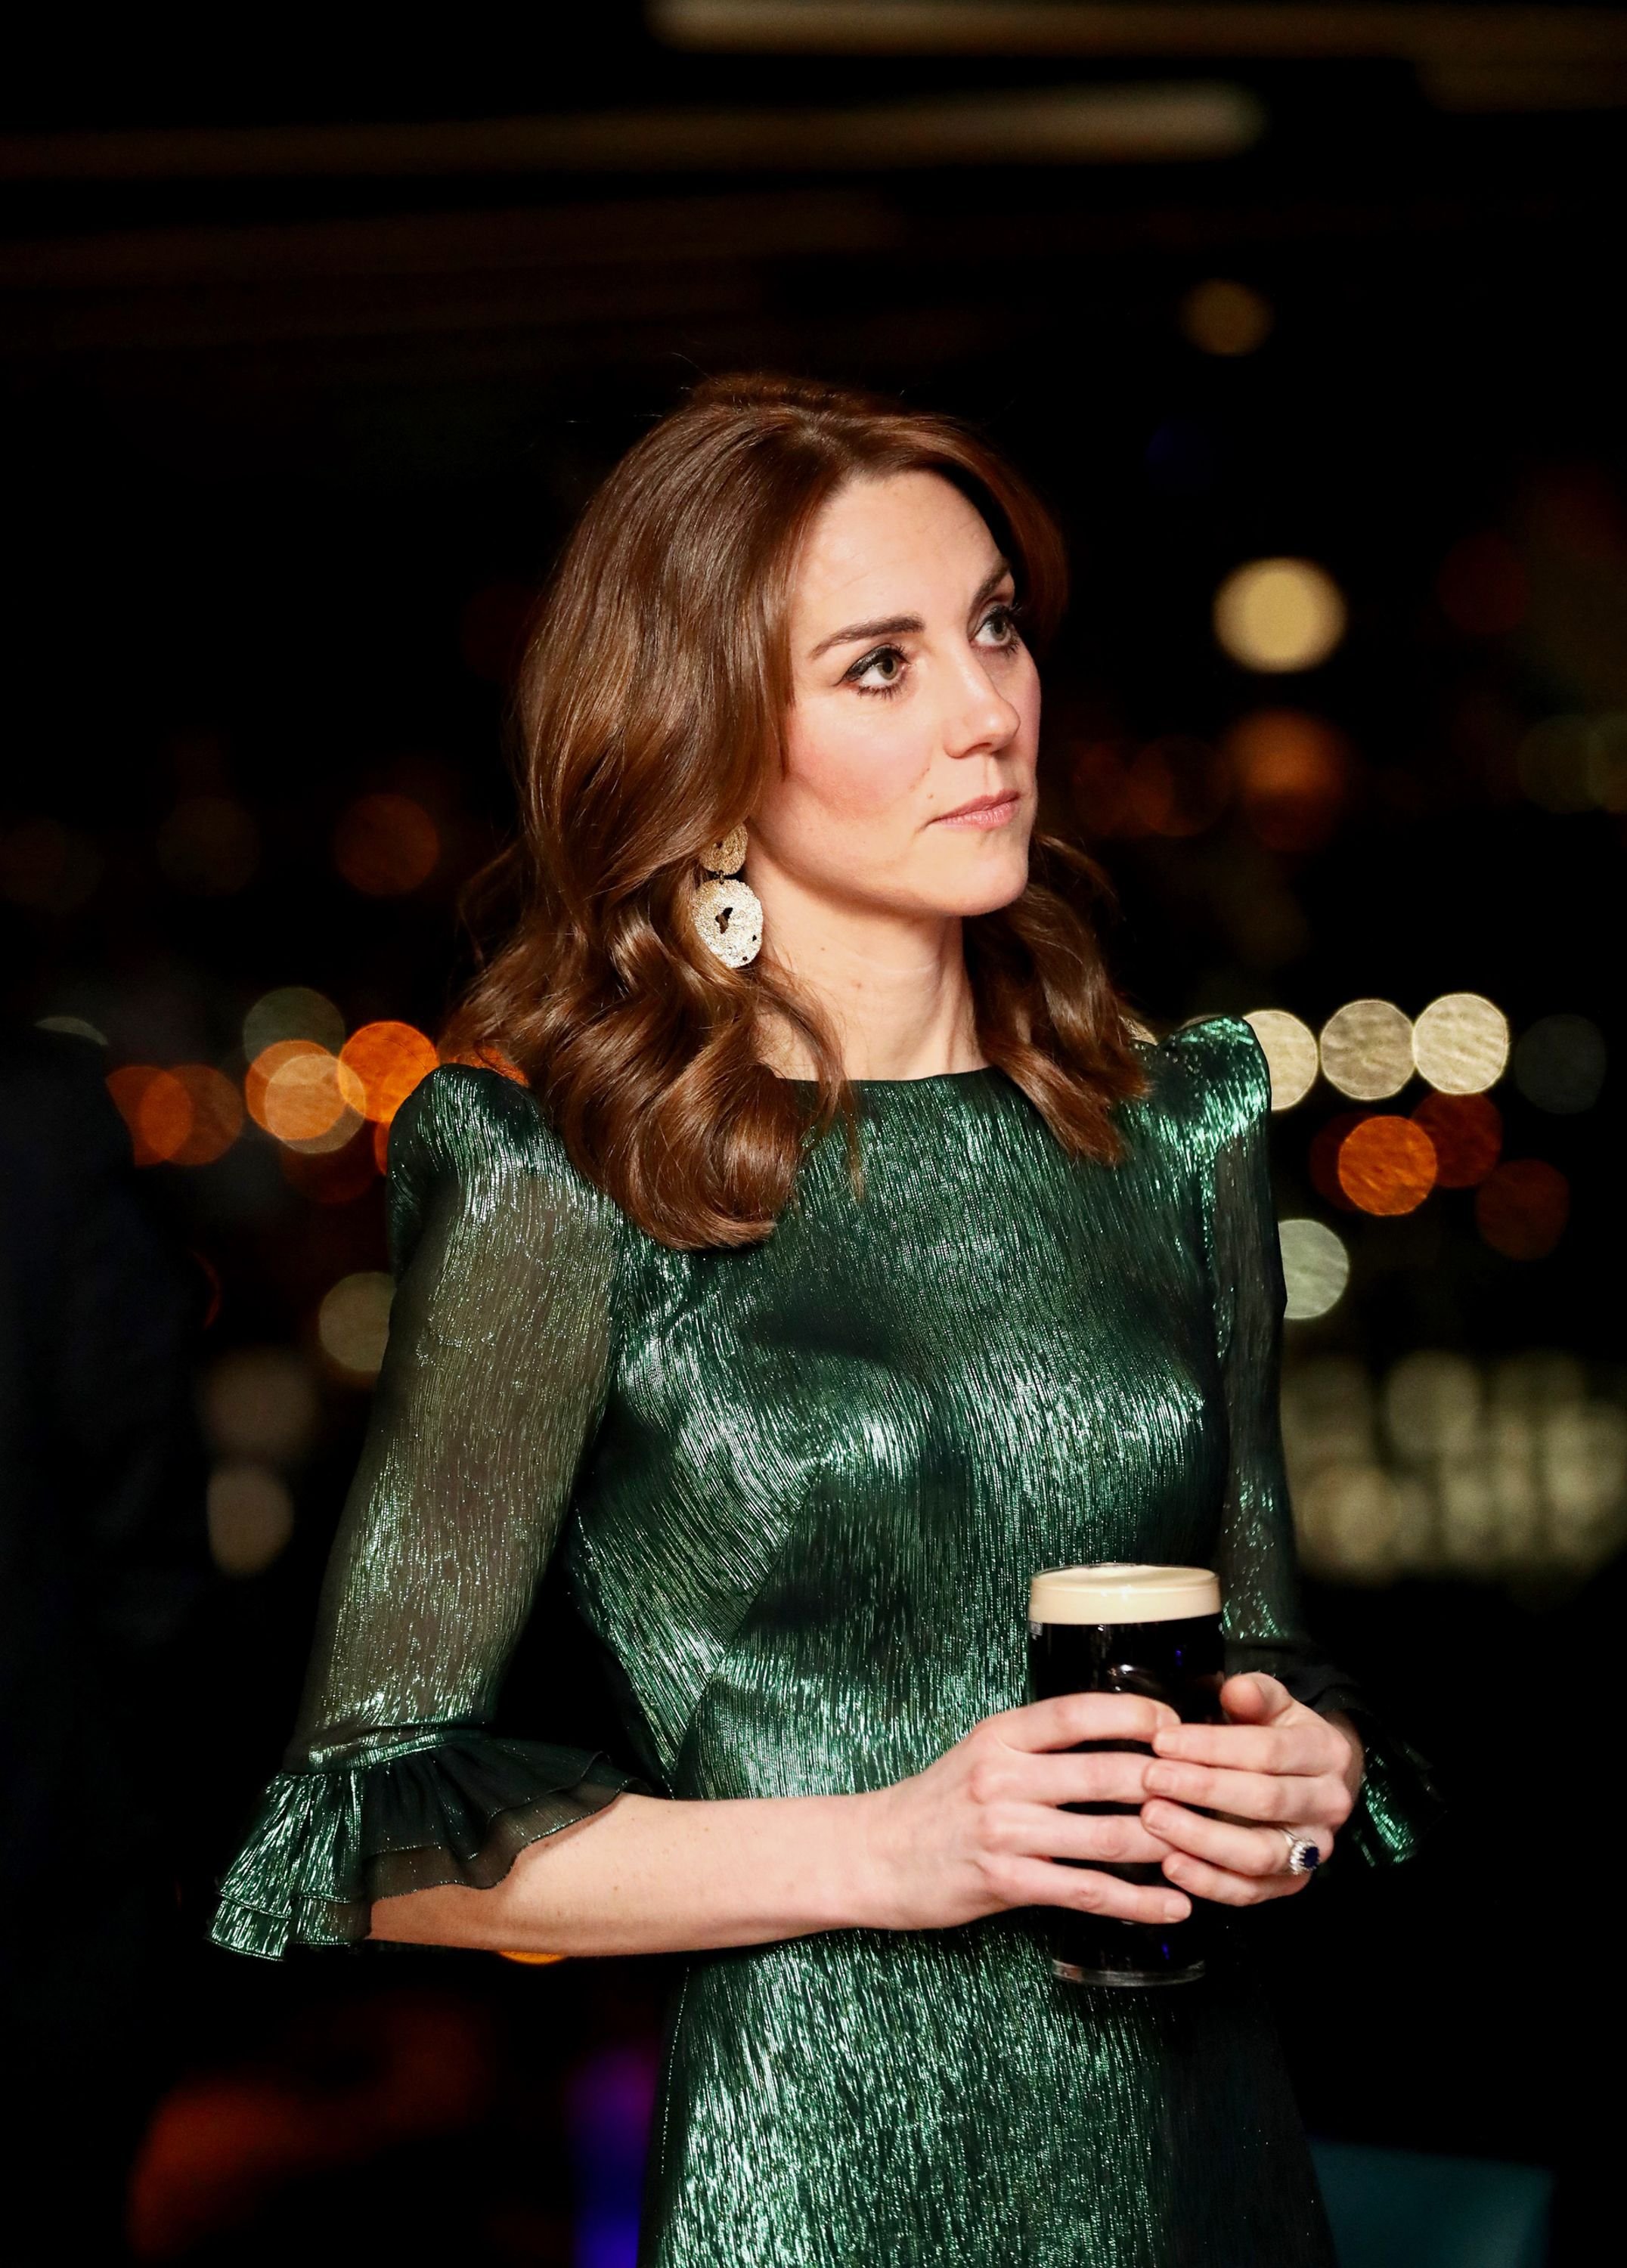 catherine-duchess-of-cambridge-holds-a-pint-of-guinness-as-news-photo-1583341038.jpg